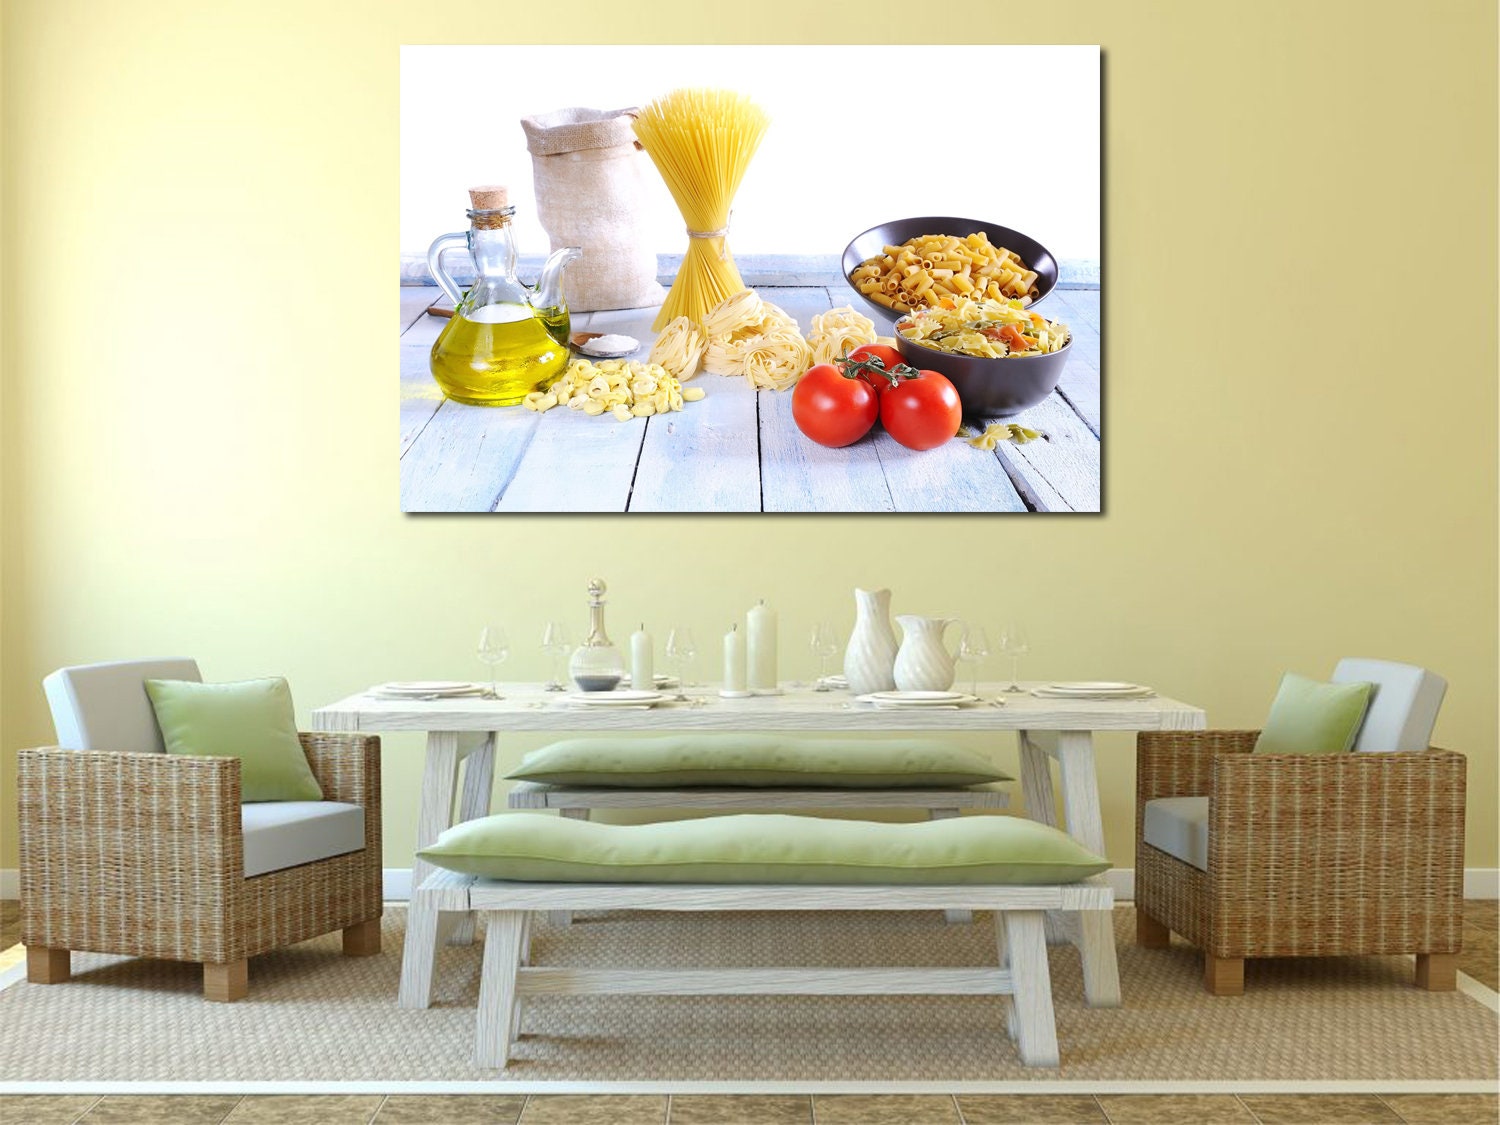 Kitchen Wall Decor Black and White Yellow Wall Art Bread Cake Fruit Picture  Canvas Print Paintings for Cafe Dining Room Restaurant Farmhouse Kitchen  Decoration 12 Wx12 Hx4 